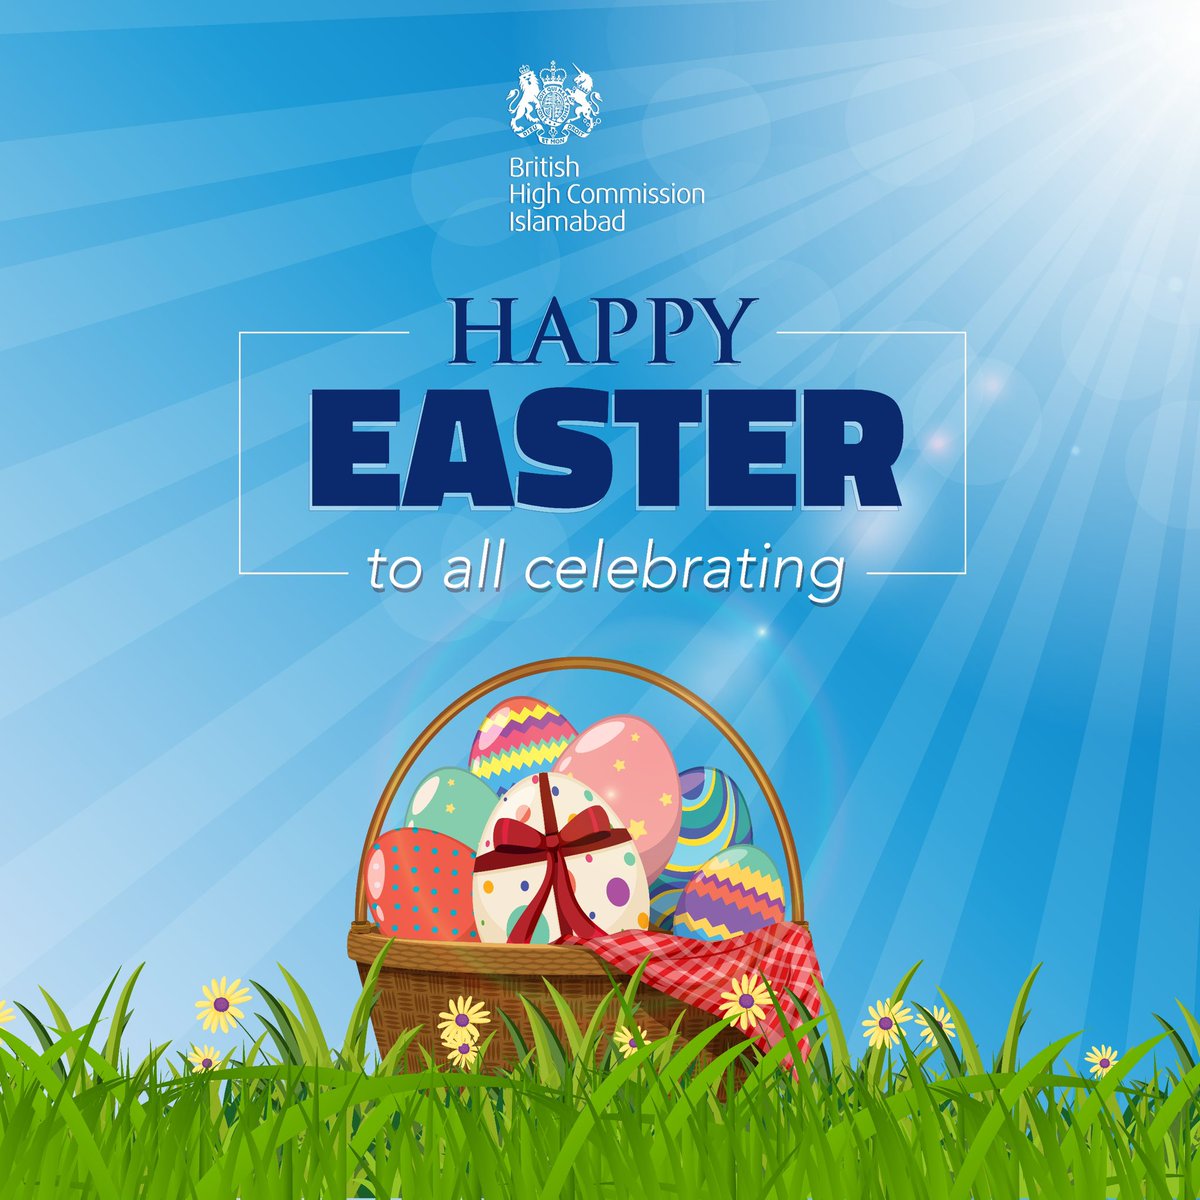 Happy Easter to all celebrating today!